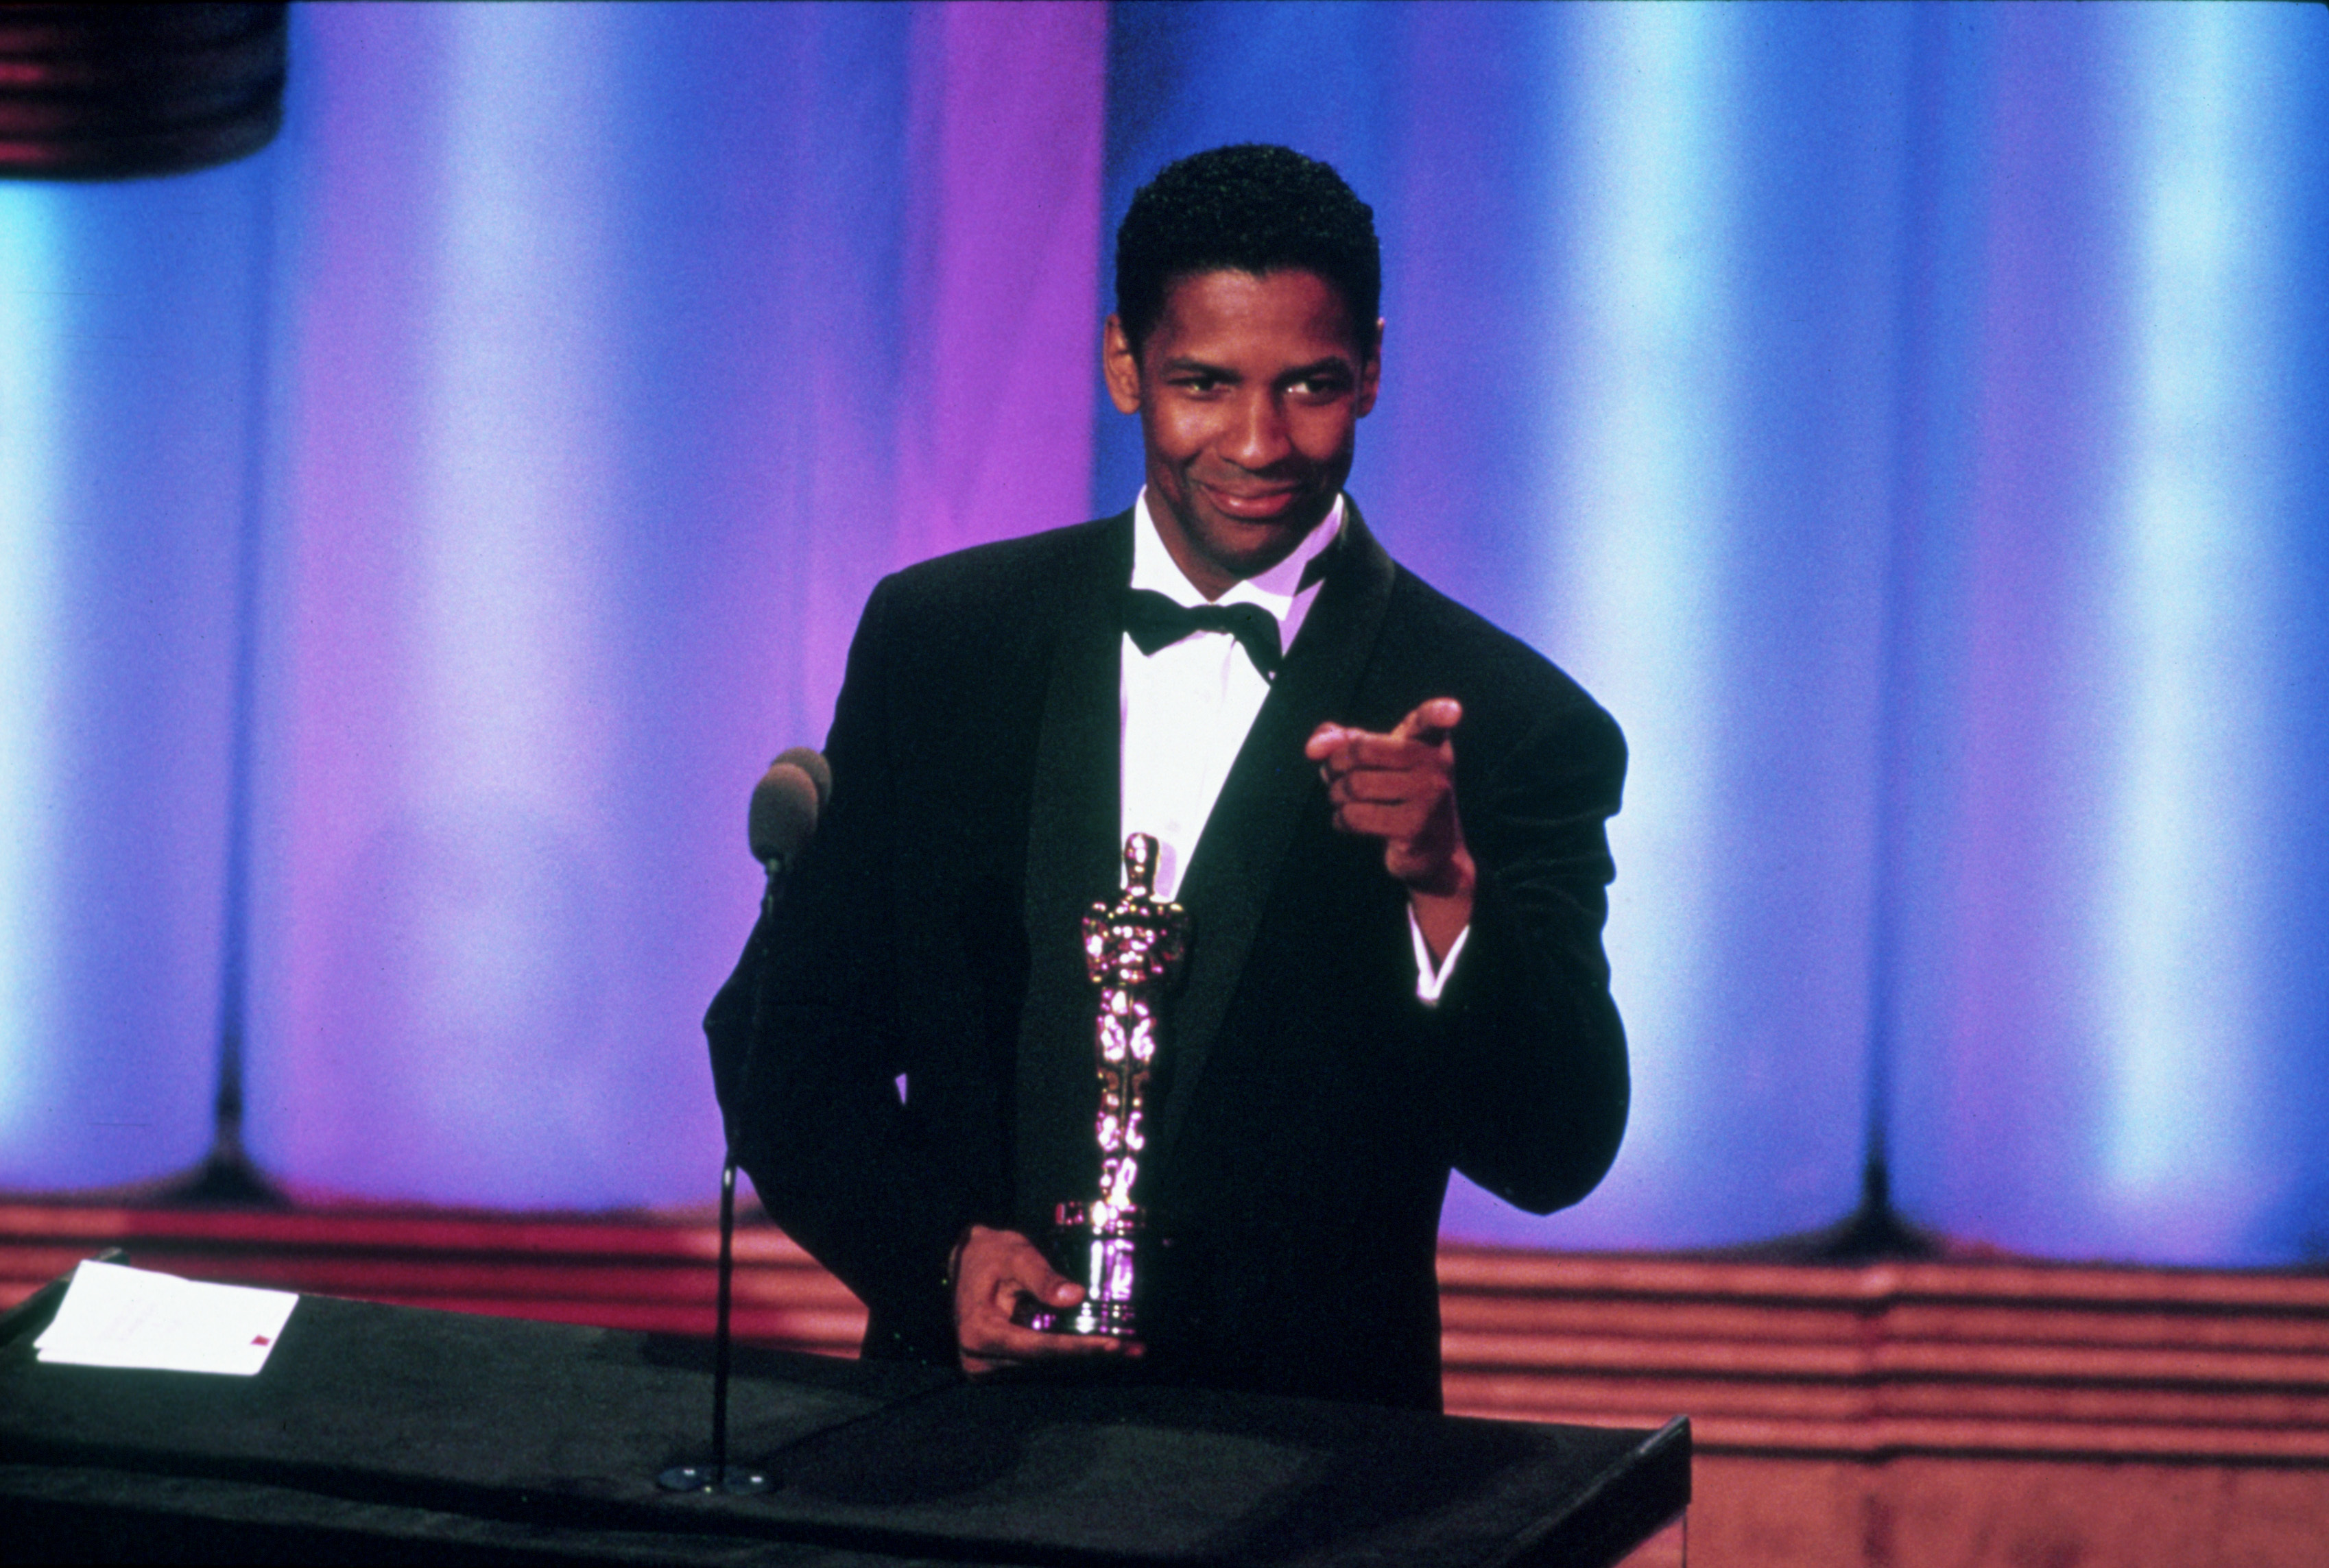 <p>Did you know that <a href="https://www.wonderwall.com/celebrity/profiles/overview/denzel-washington-1078.article">Denzel Washington</a> is the first Black star to win two Oscars? He took home the Academy Award for best supporting actor in 1990 for his work in "Glory" and the best lead actor prize in 2002 for his performance in "Training Day." In February 2022, Denzel made history again when he scored his 10th Oscar nomination -- best actor for his title role in "The Tragedy of Macbeth" -- which extended his reign as the most nominated Black actor in Academy Awards history.</p>